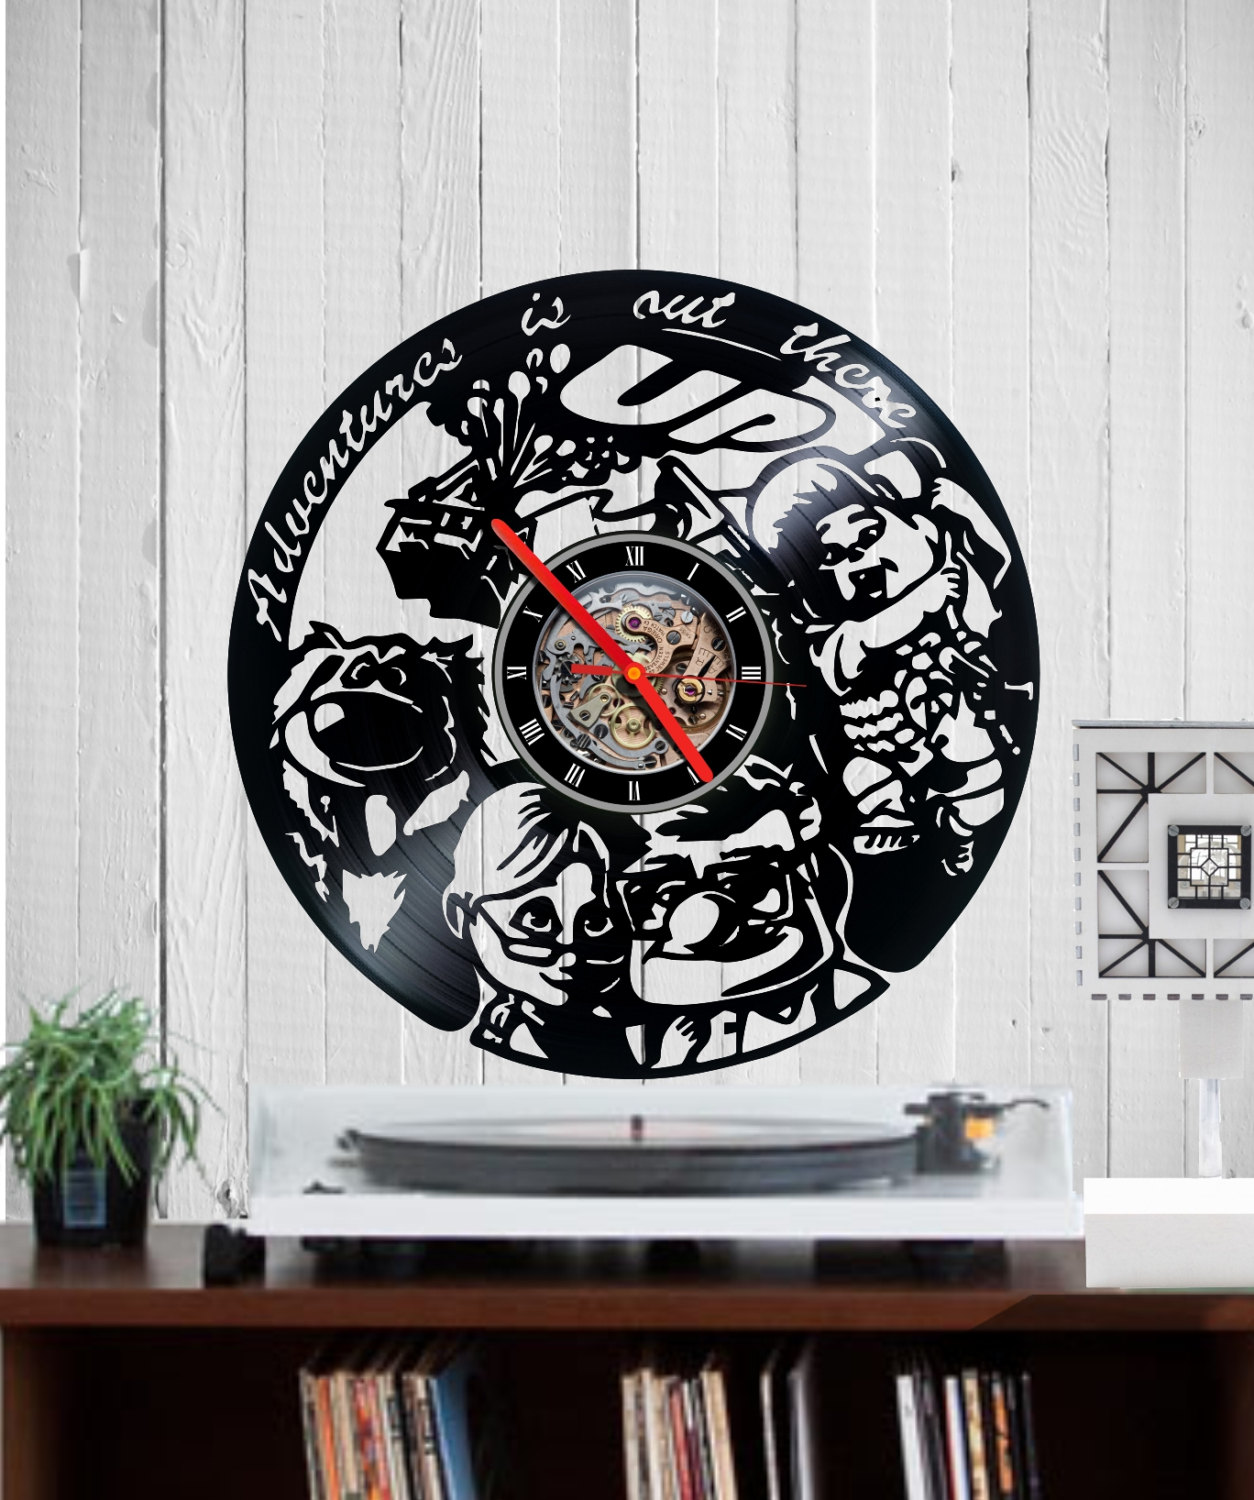 Gift Ideas for Boys and Girls Perfect Element of The Interior Unique Modern Art Get Unique Bedroom or livingroom Wall Decor Doctor Who TV series Yellow Led Light Vinyl Record Wall Clock